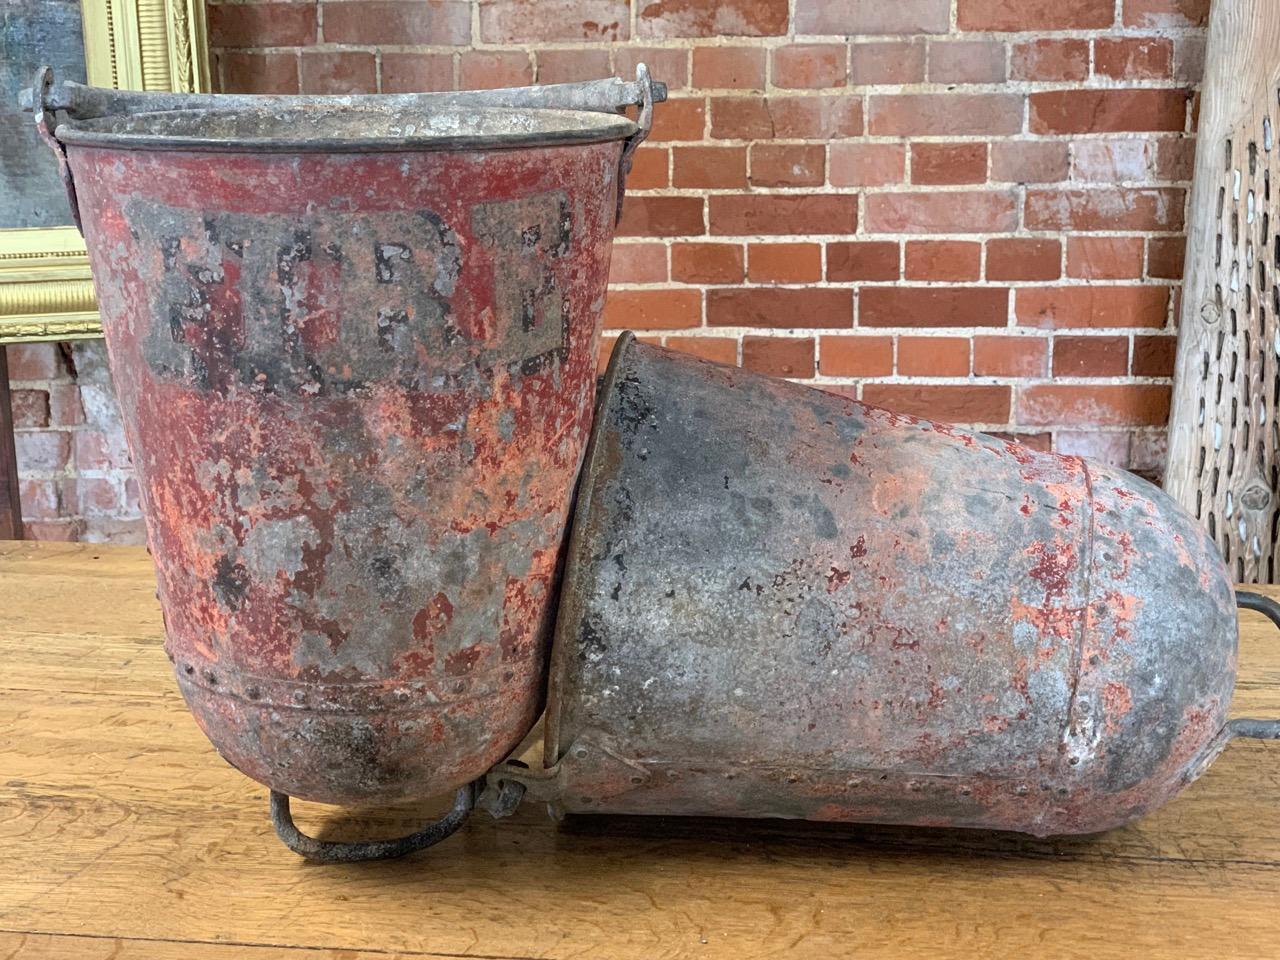 A nice pair of early 20th century metal fire buckets with original worn paint.
Please contact us for an accurate shipping quote.